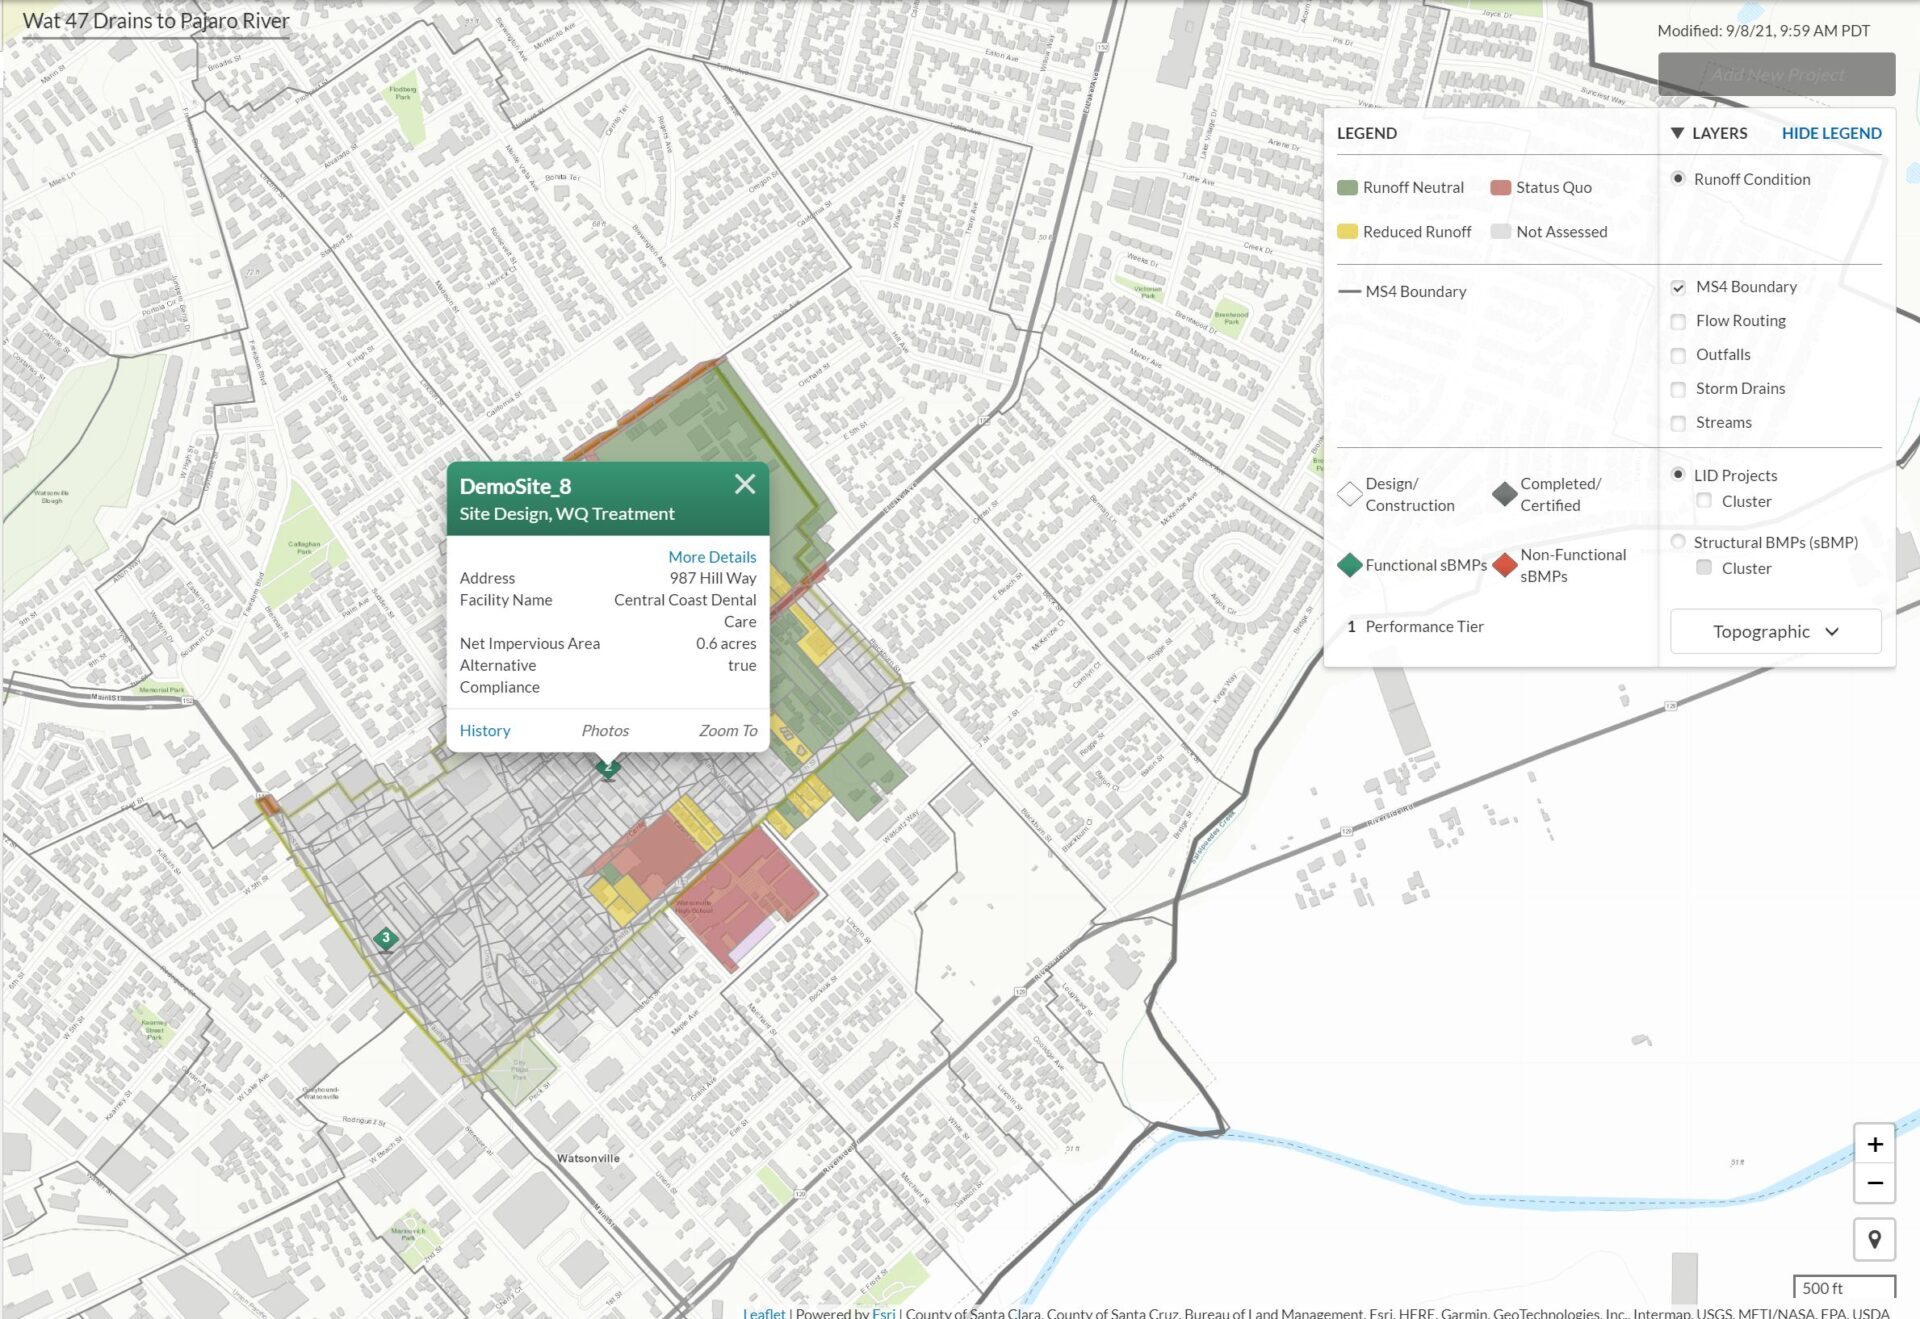 Use interactive maps in 2NFORM stormwater compliance software